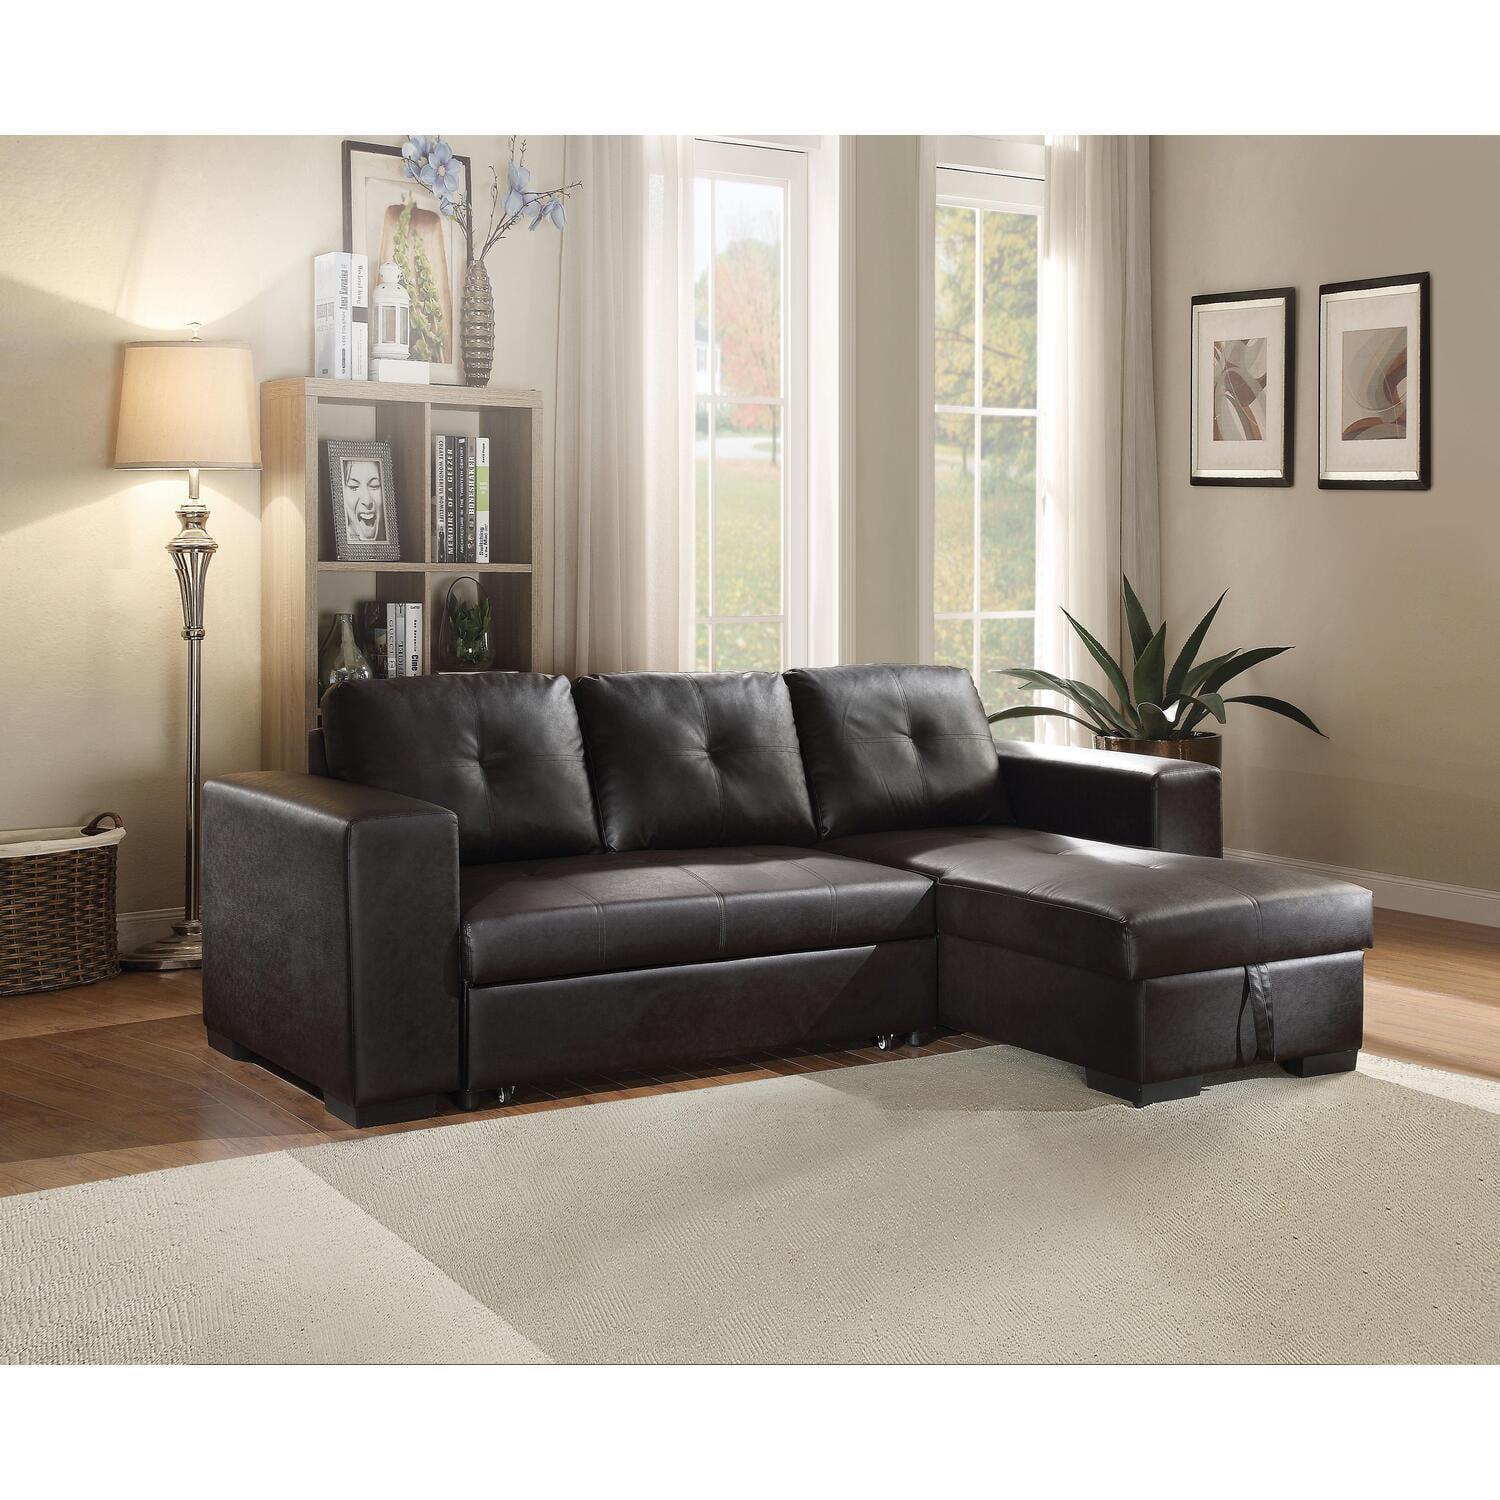 Lloyd Twin-Size Tufted Black Faux Leather Sectional with Storage